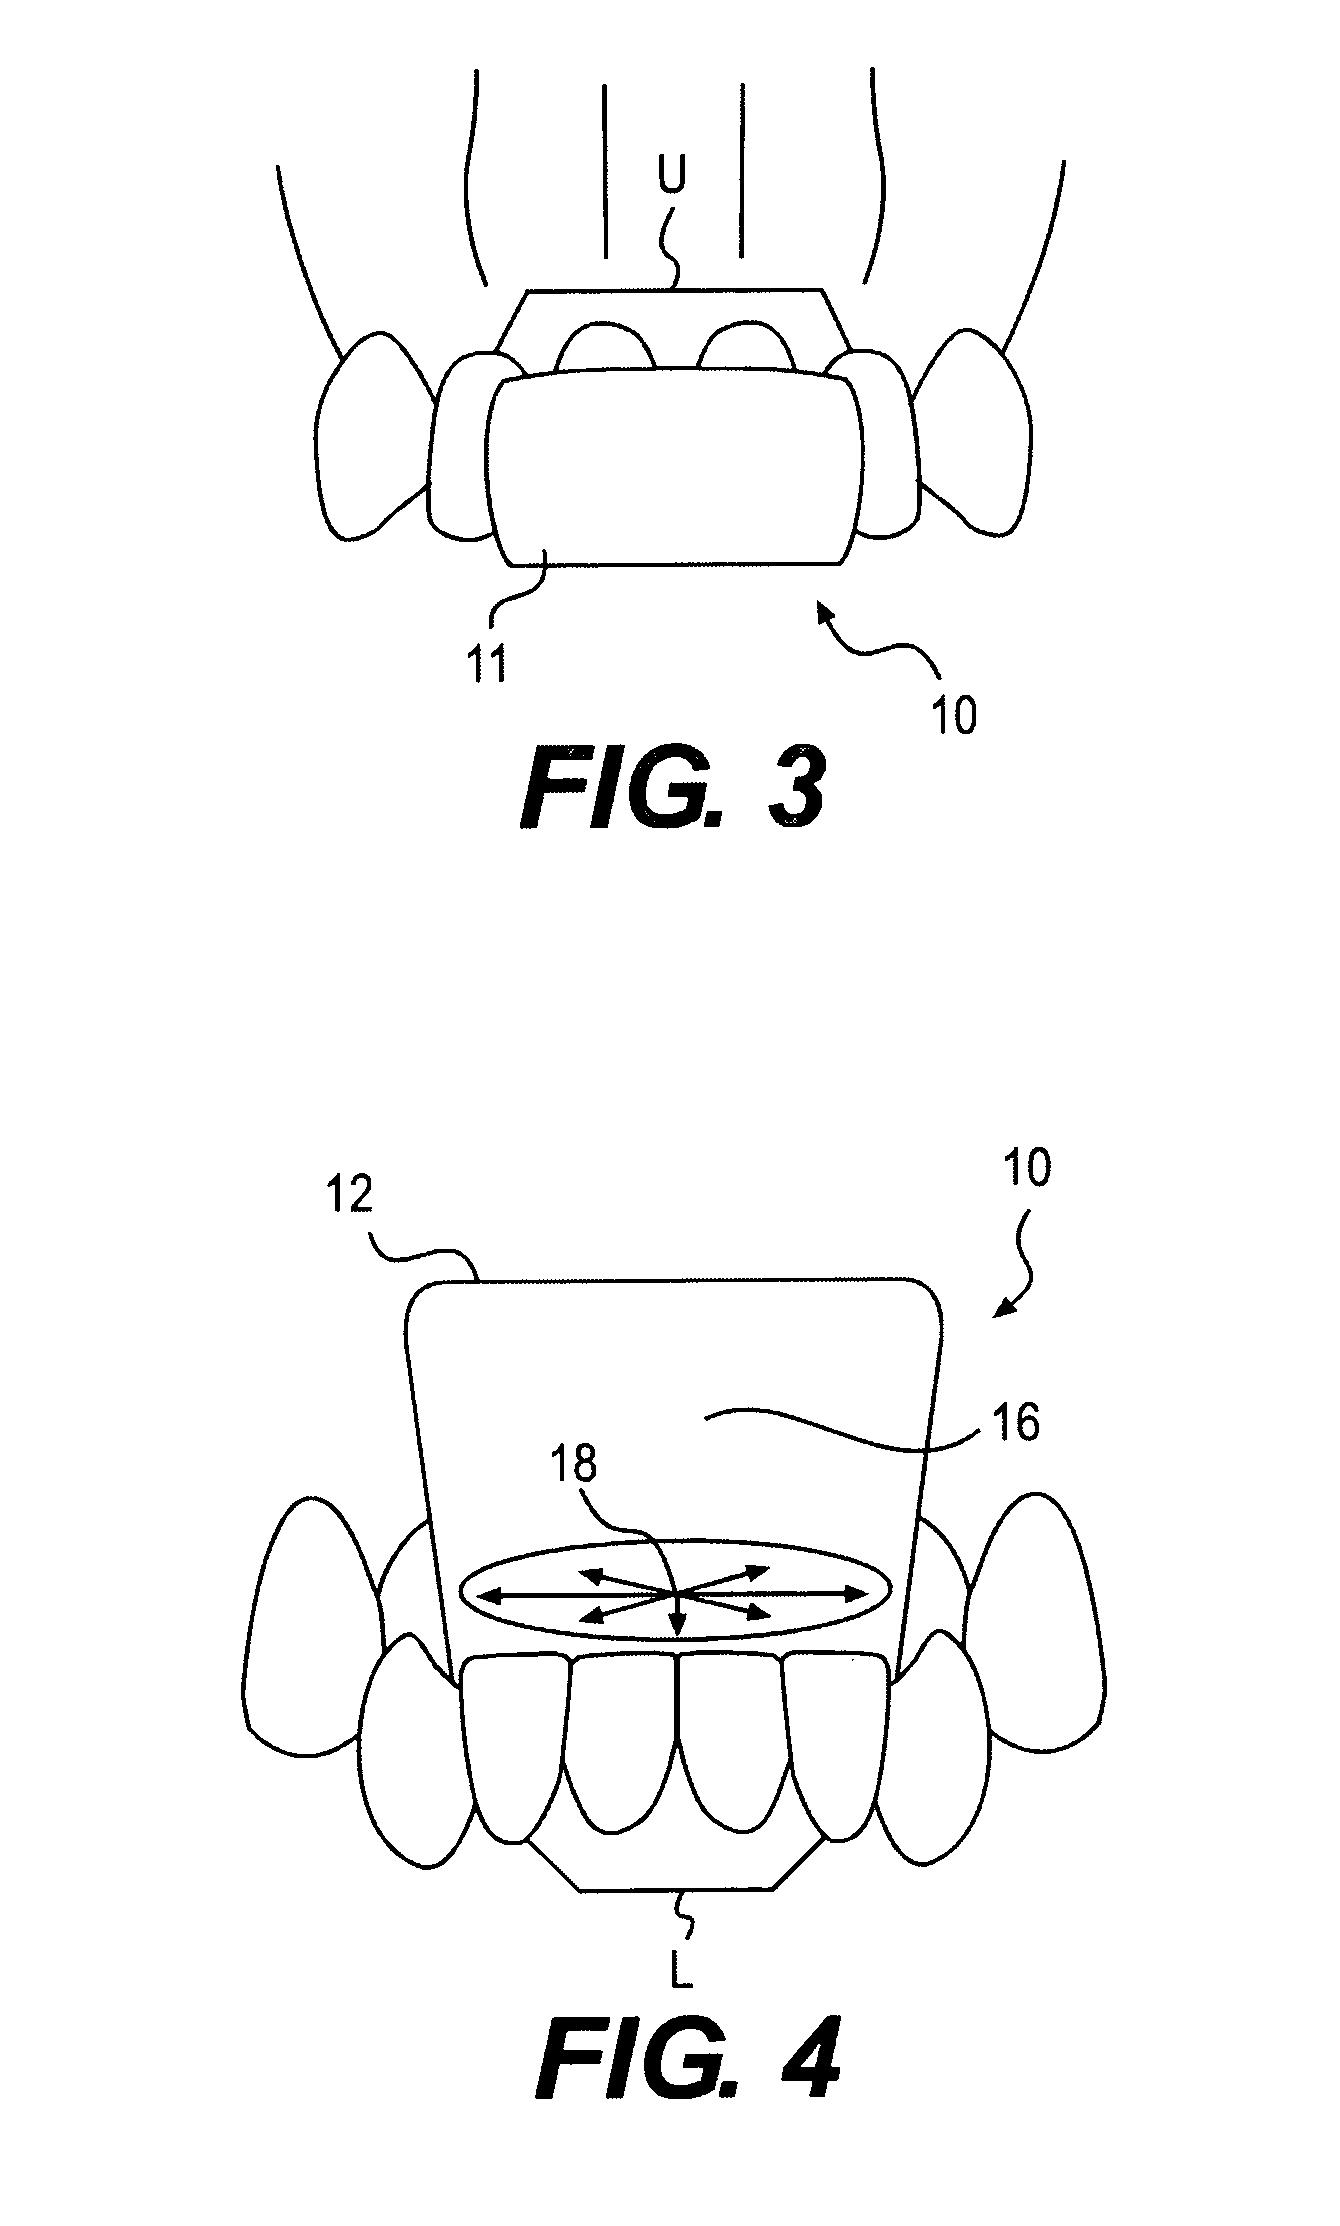 Intra-oral device